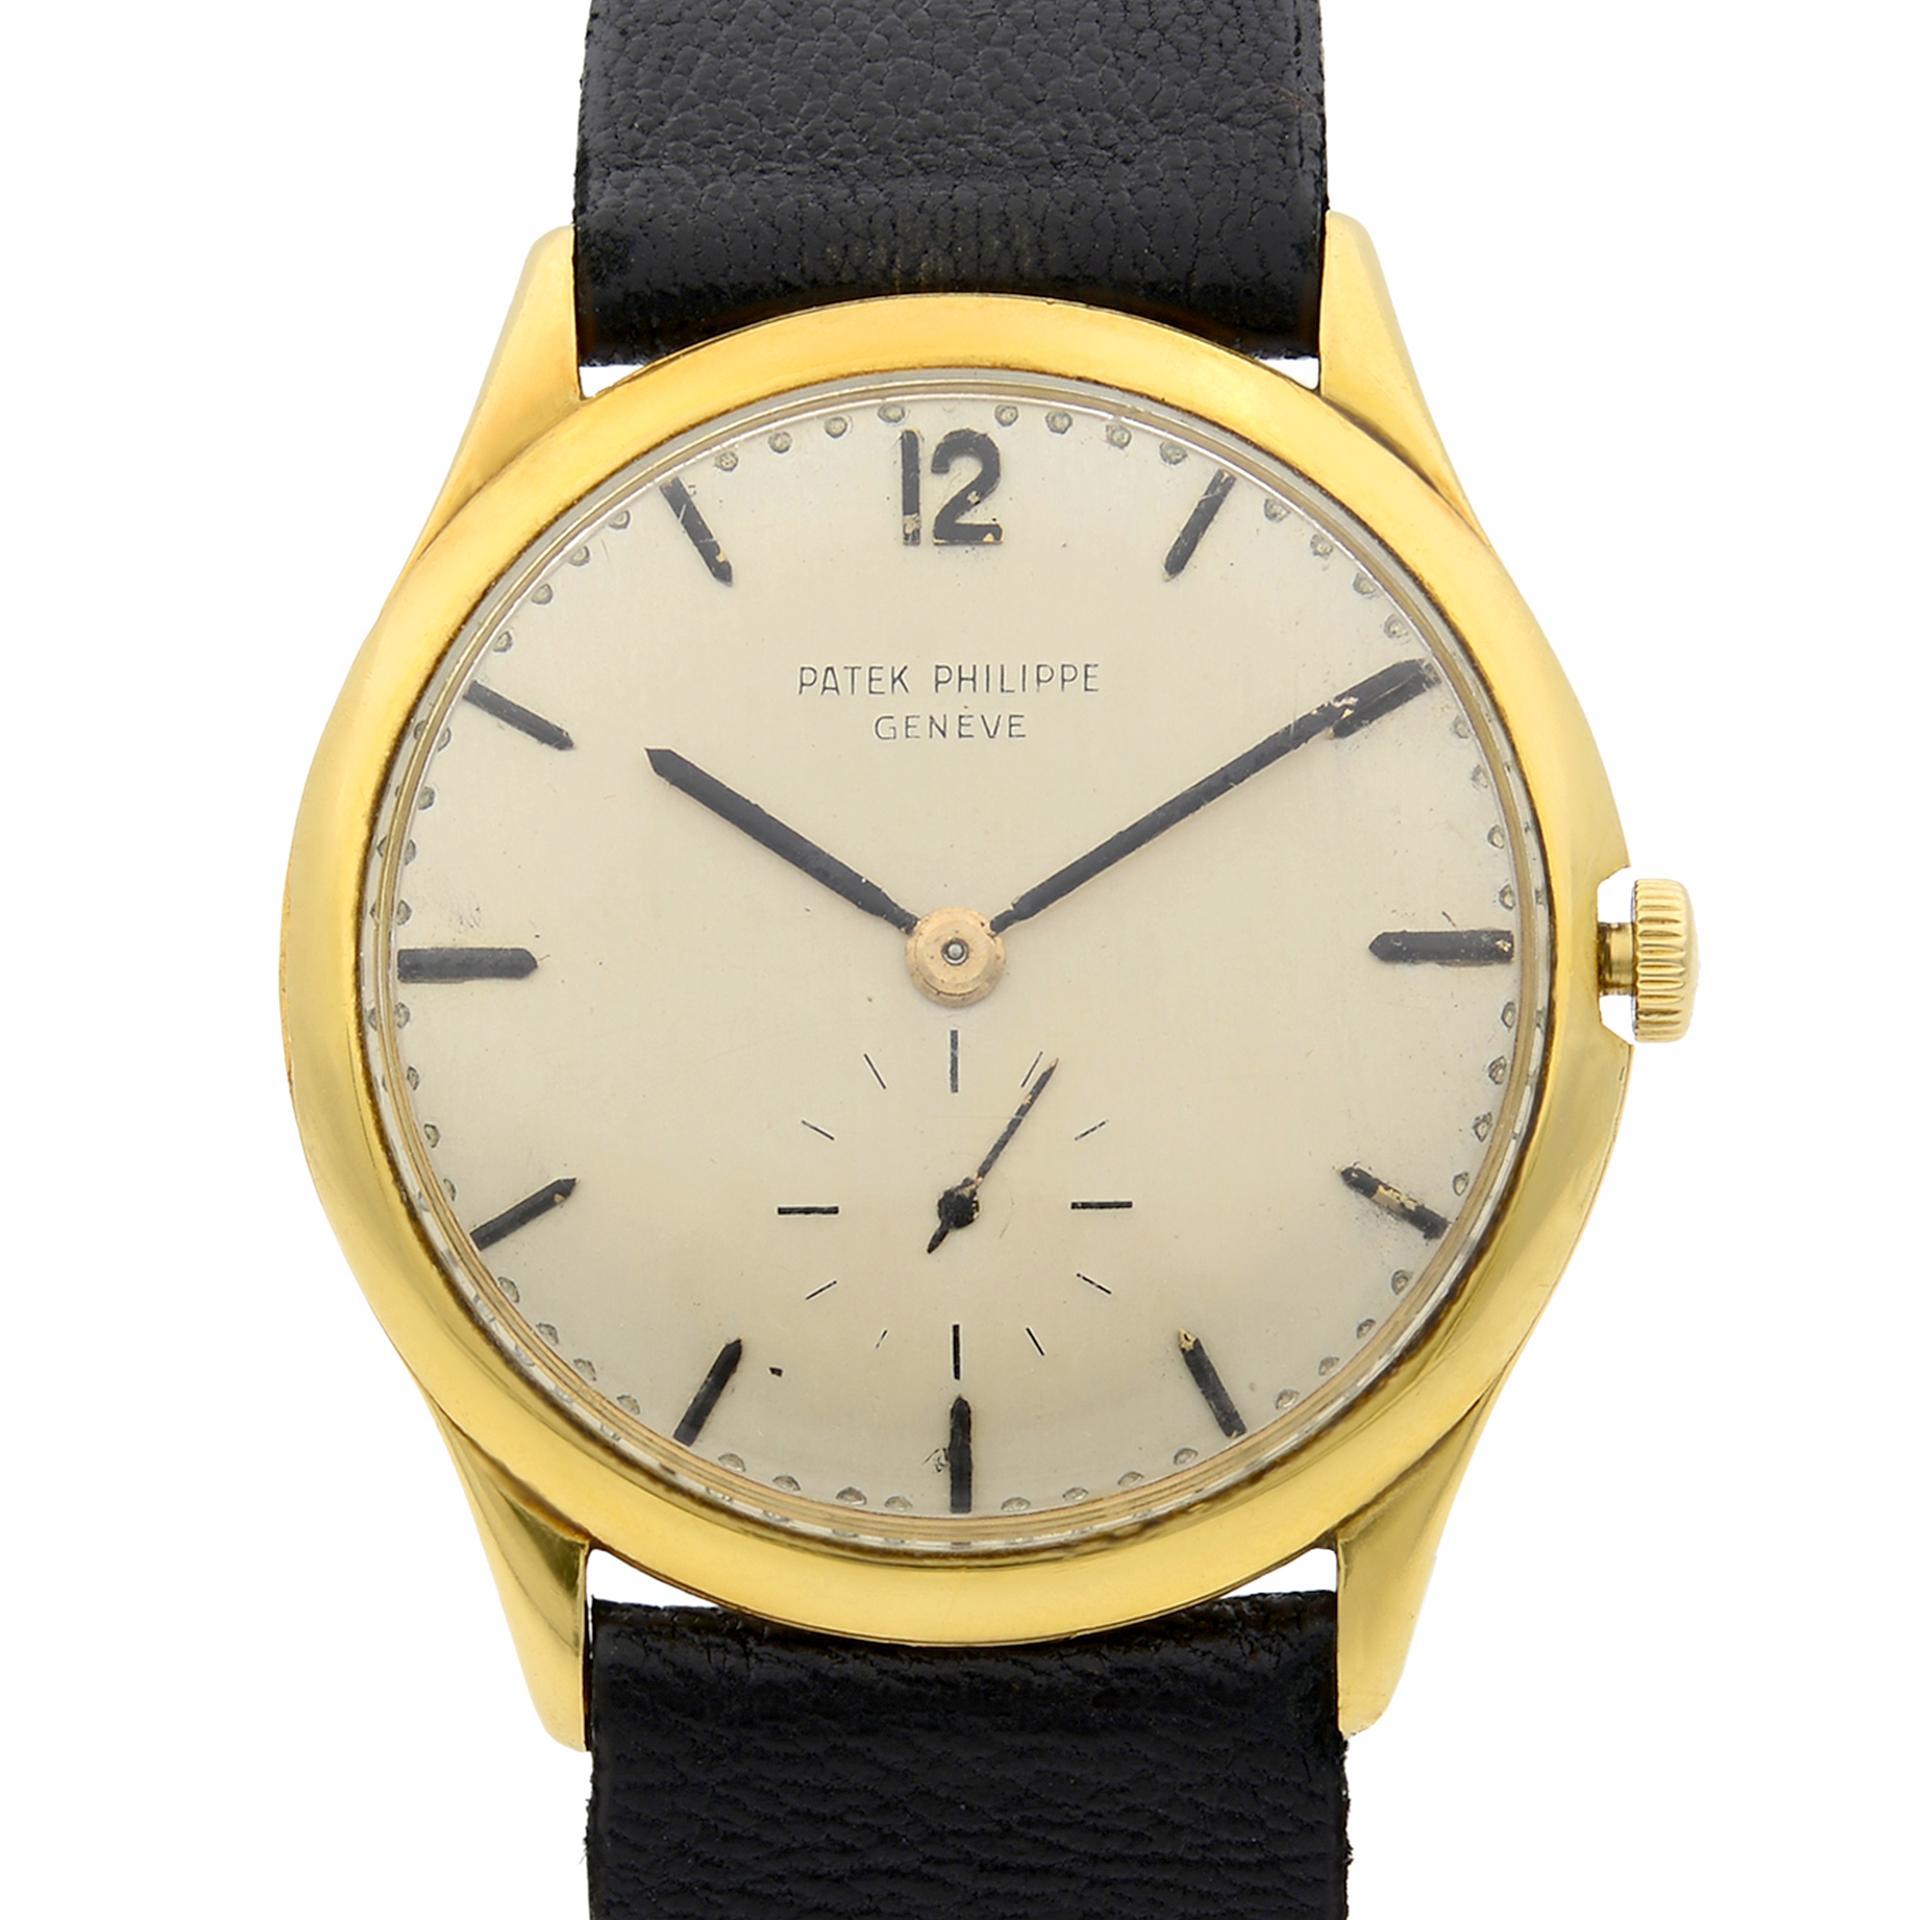 This pre-owned Patek Philippe Calatrava  2557 is a beautiful Unisex timepiece that is powered by mechanical (hand-winding) movement which is cased in a yellow gold case. It has a round shape face, small seconds subdial dial and has hand sticks style